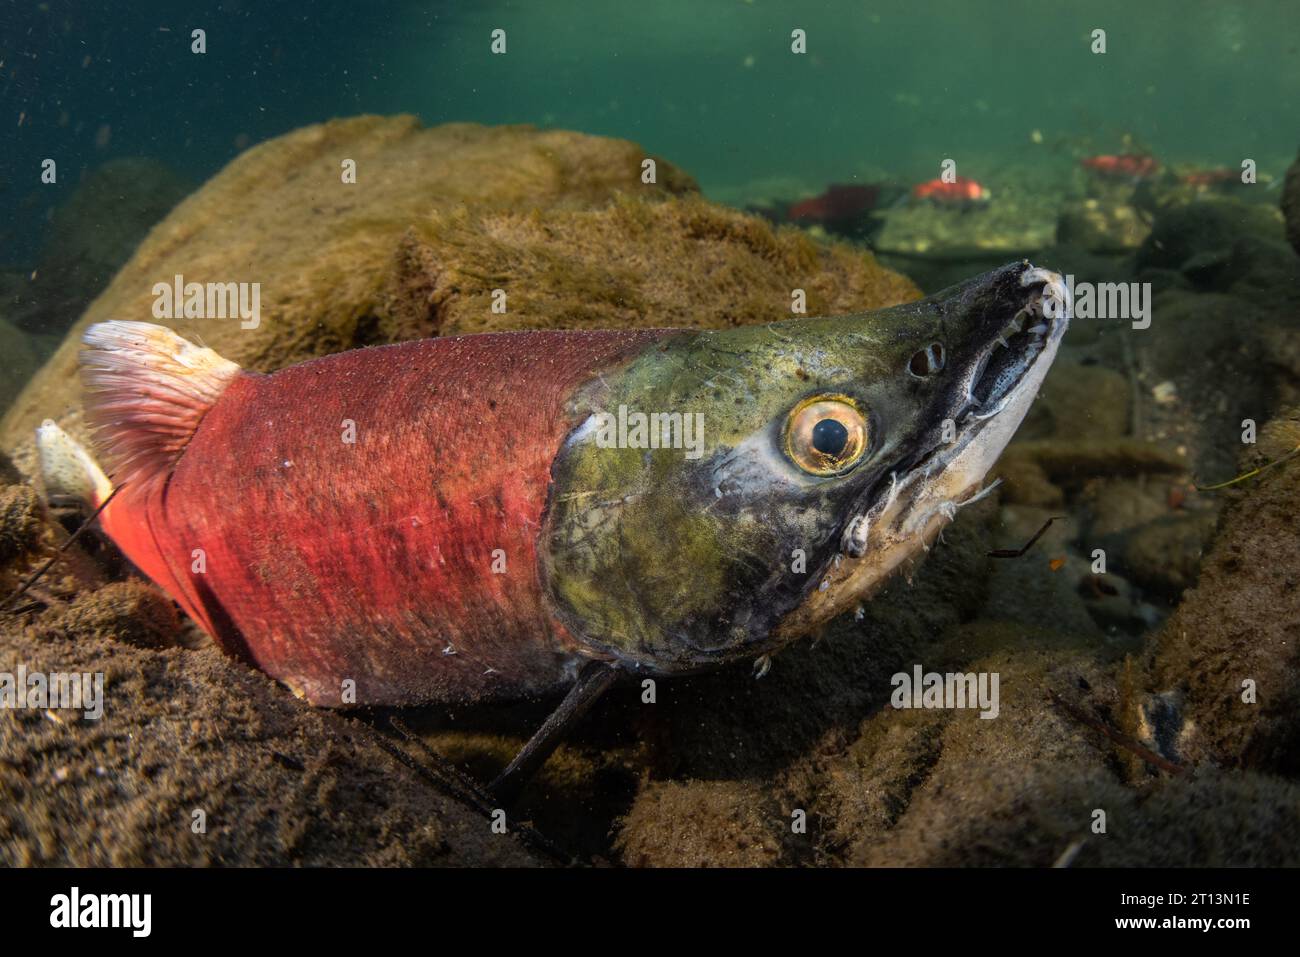 Kokanee salmon (Oncorhynchus nerka) in their colorful red spawning stage as they congregate and migrate for spawning. Stock Photo